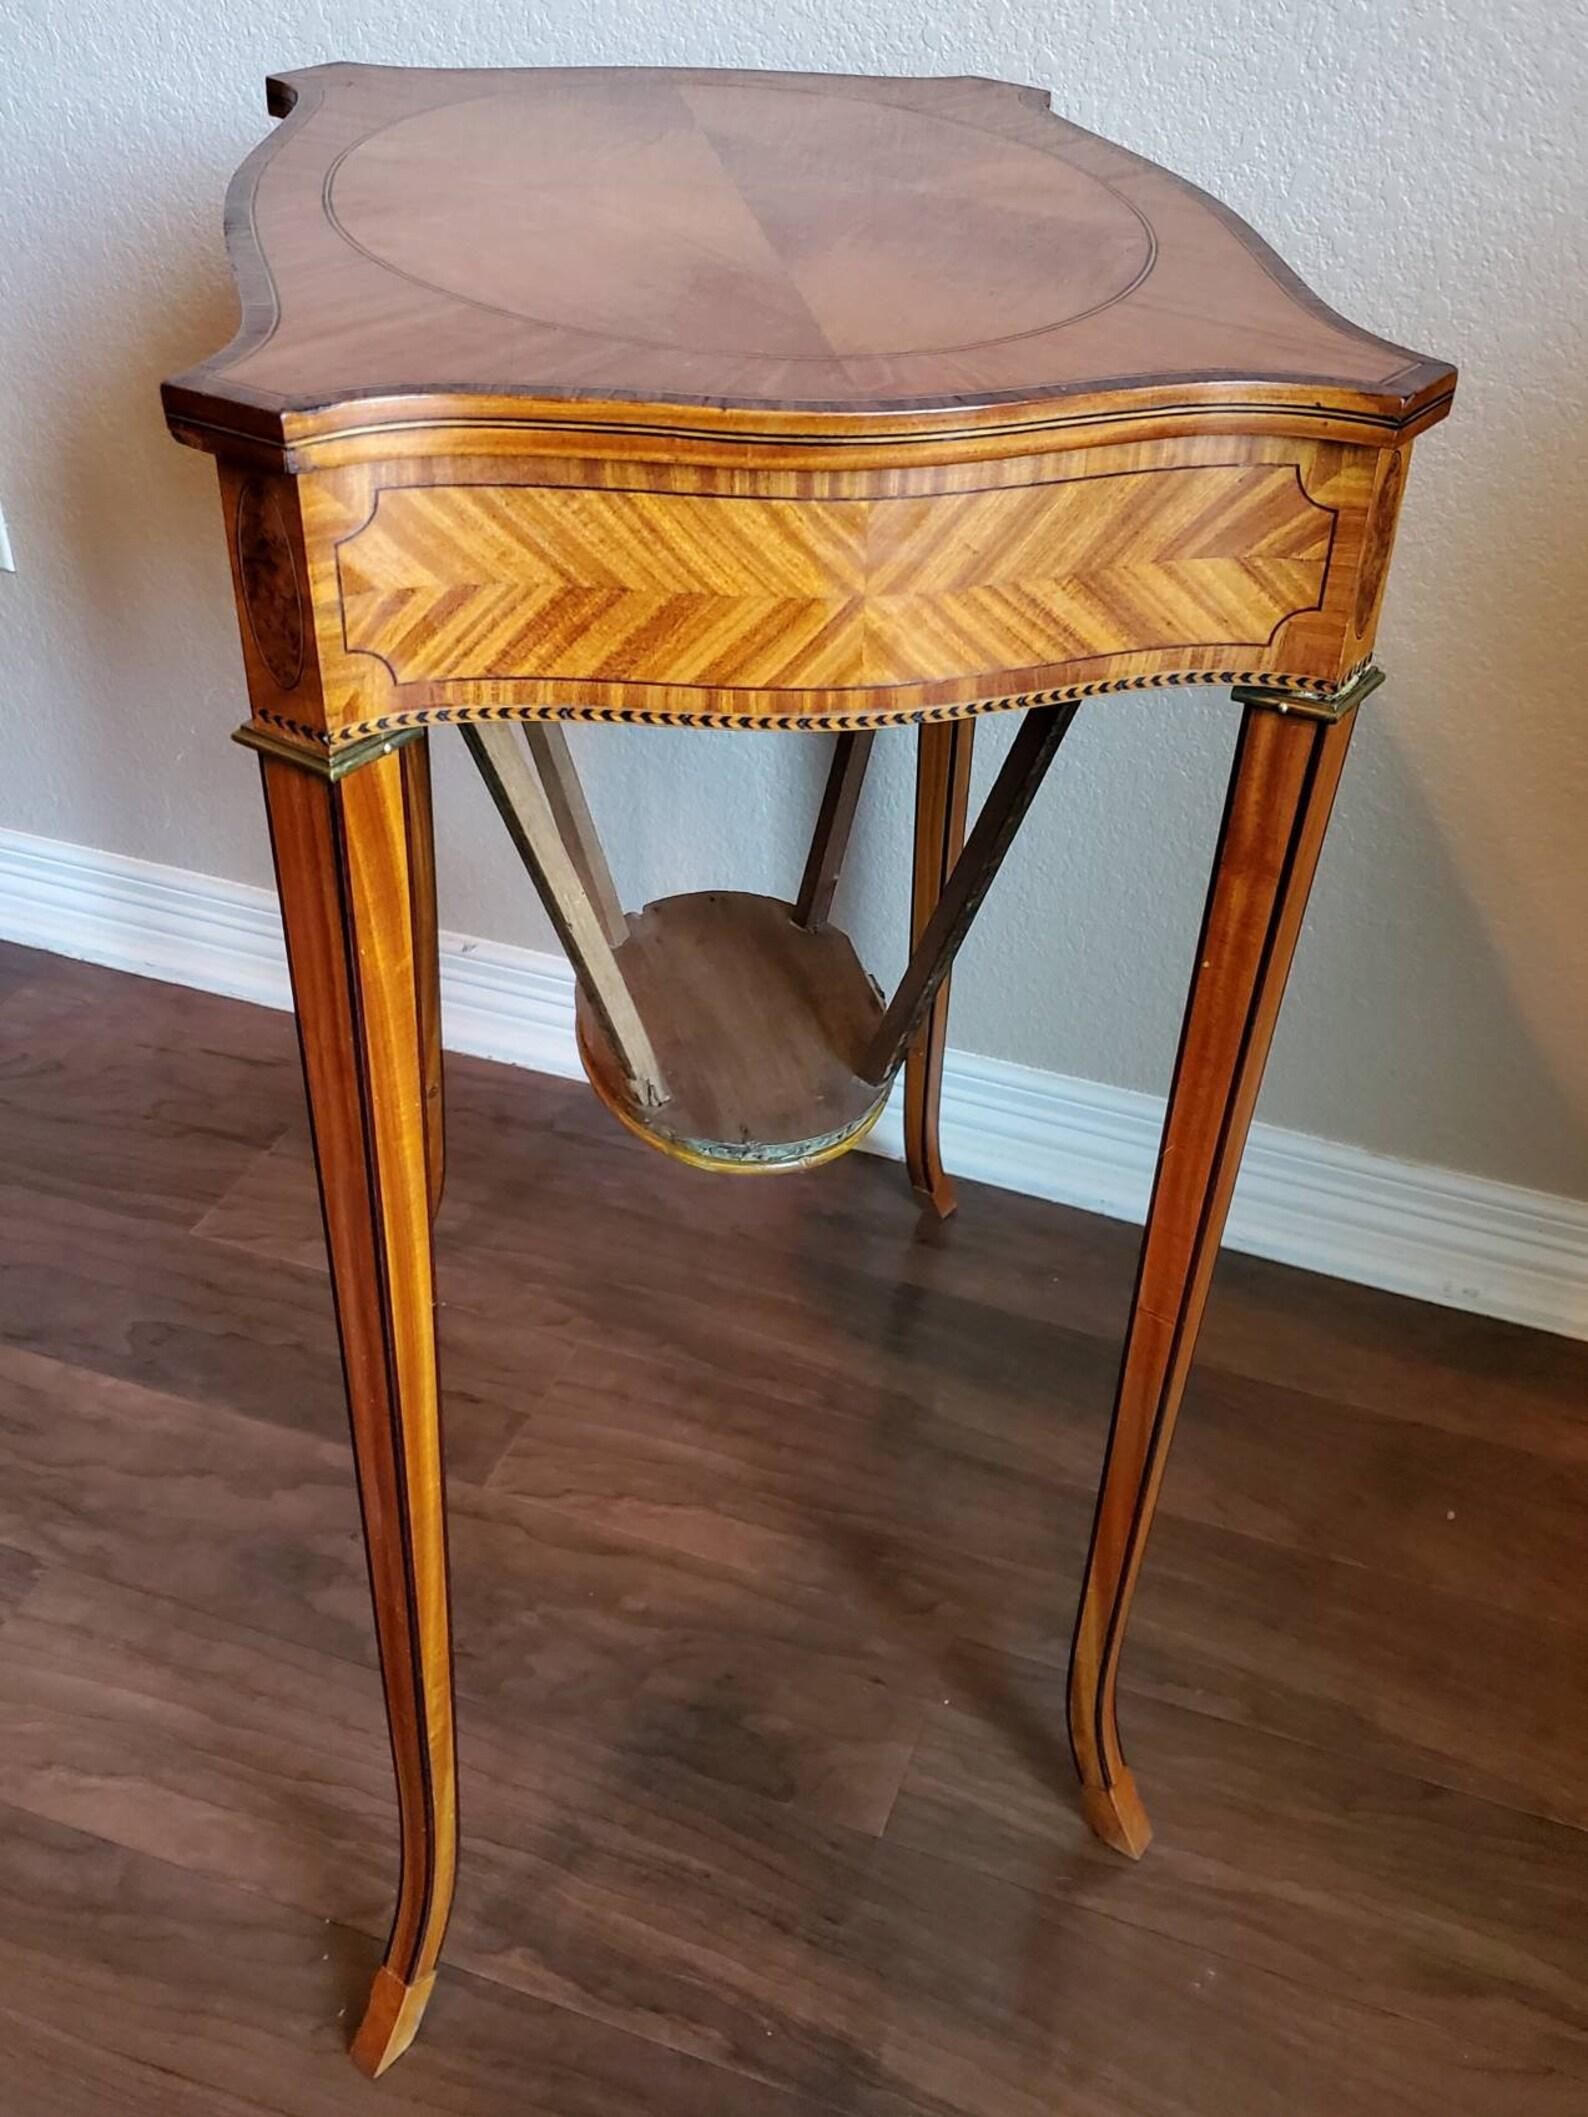 Antique English Edwardian Marquetry Inlaid Sewing Table For Sale 1